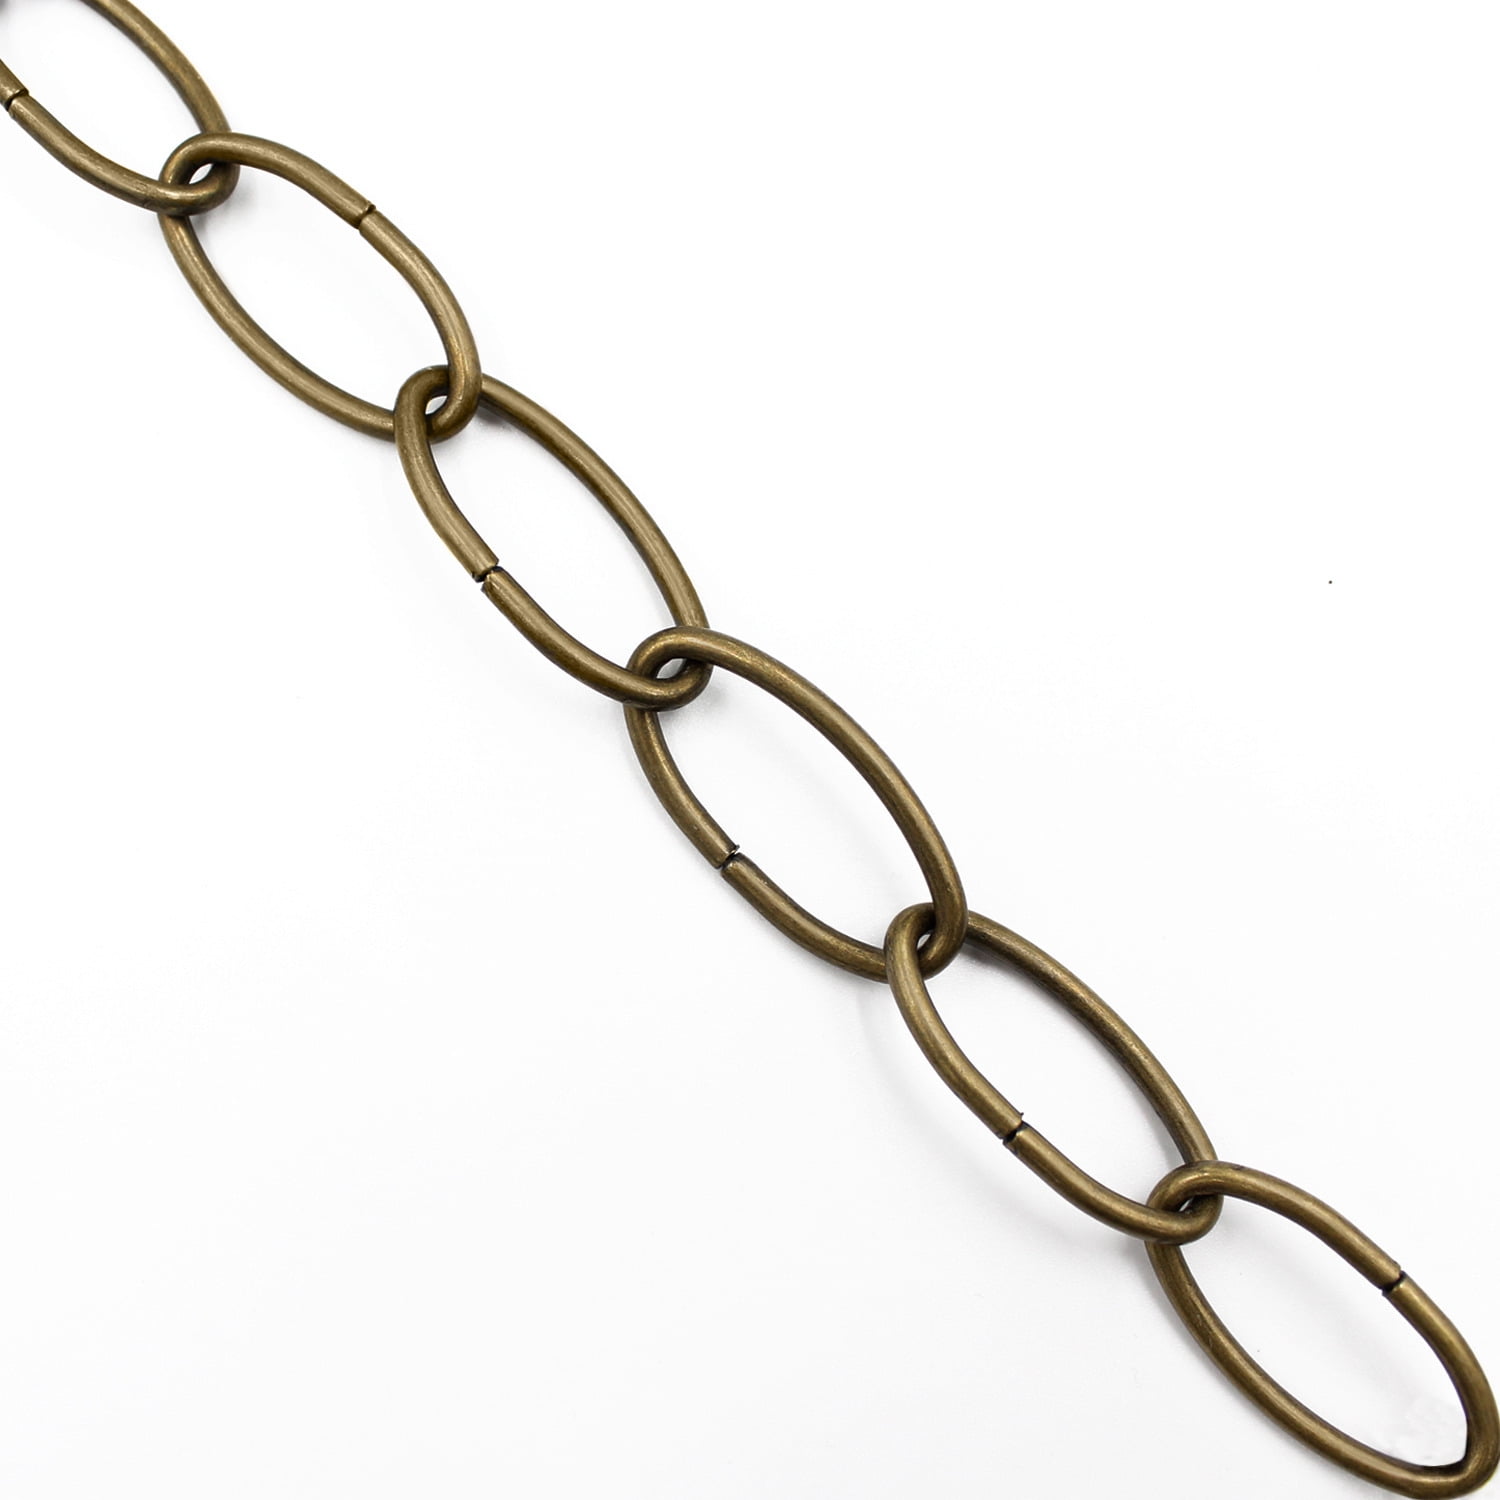 Hanging Chains 41cm Extension Link 3 Point Holder w S Hook Clips Black -  Bed Bath & Beyond - 36742680